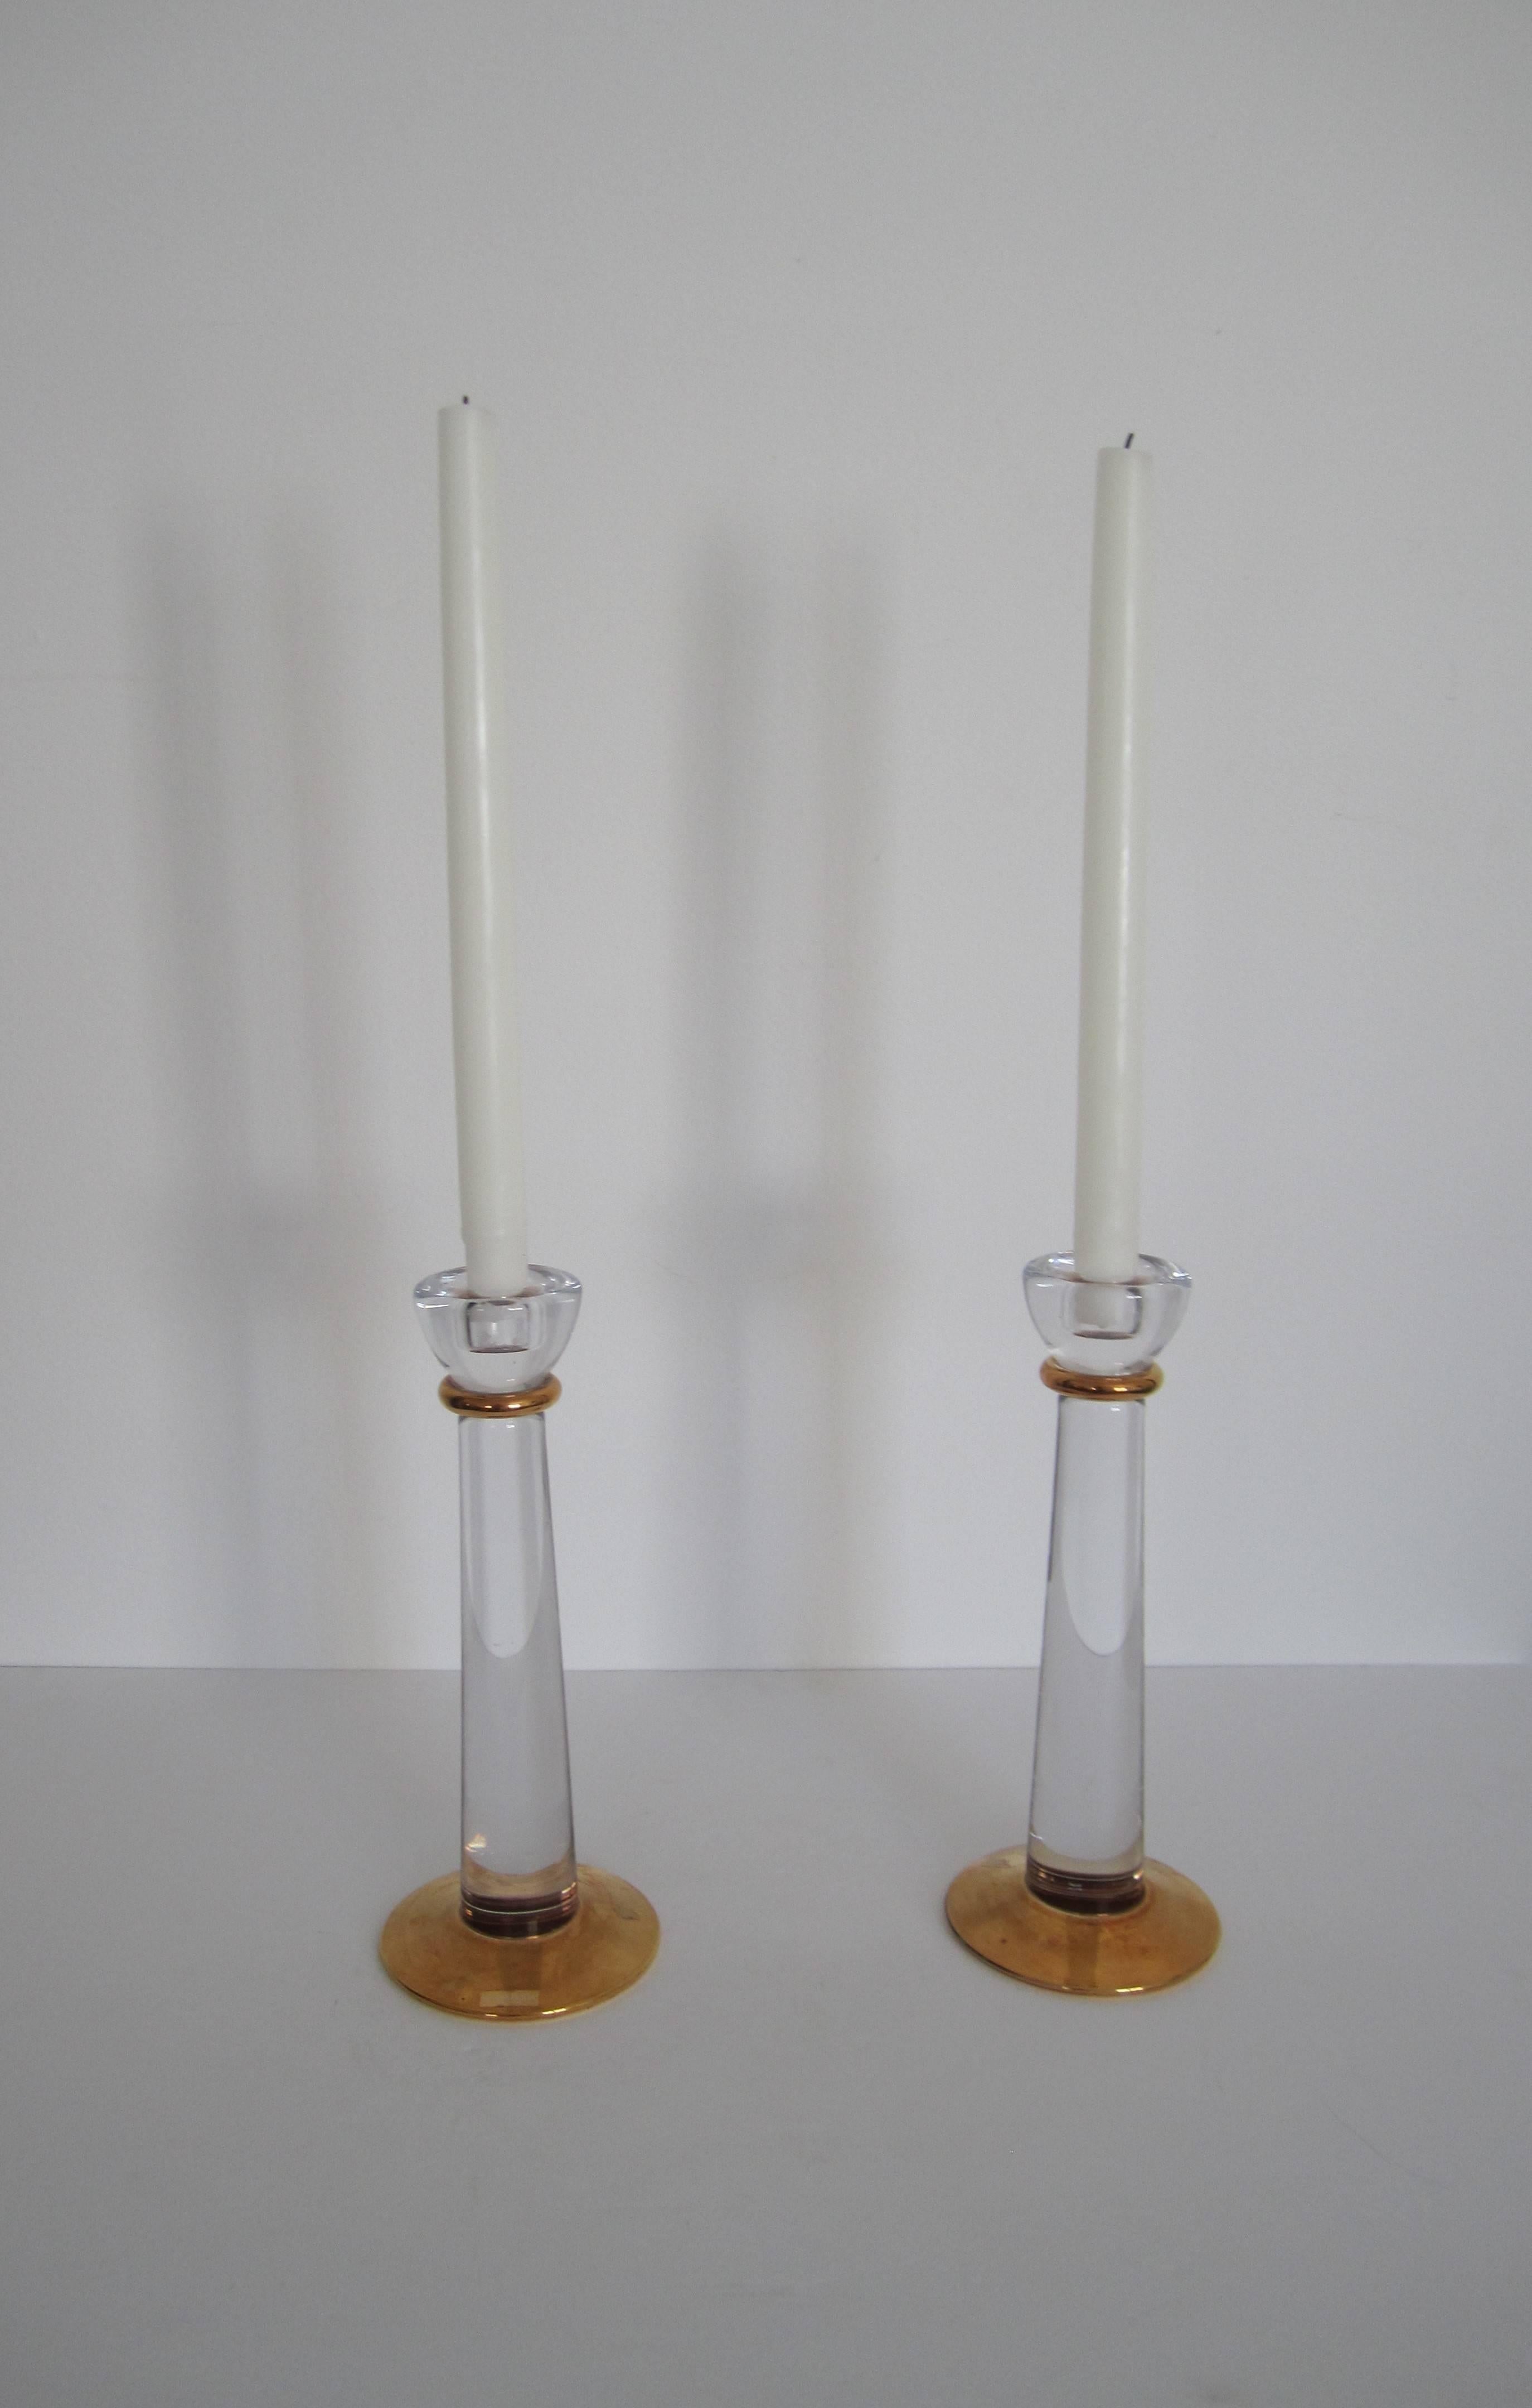 20th Century Substantial Scandinavian Crystal Candle Stick Holders, Sweden, 1990s